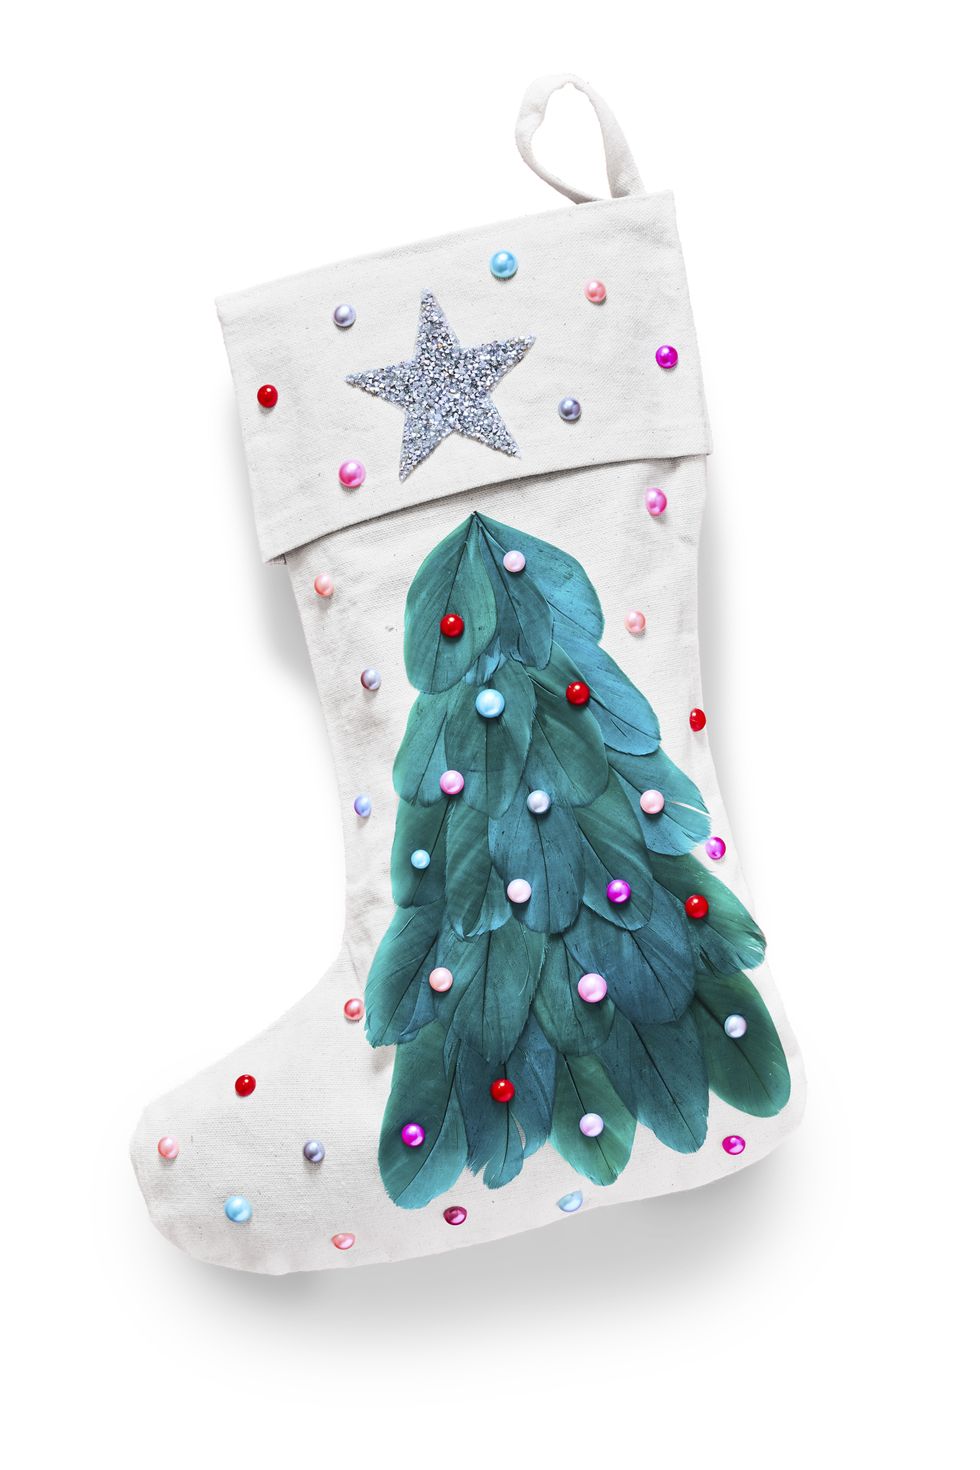 https://hips.hearstapps.com/hmg-prod/images/feather-tree-diy-christmas-stockings-1606849128.jpg?crop=1xw:1xh;center,top&resize=980:*